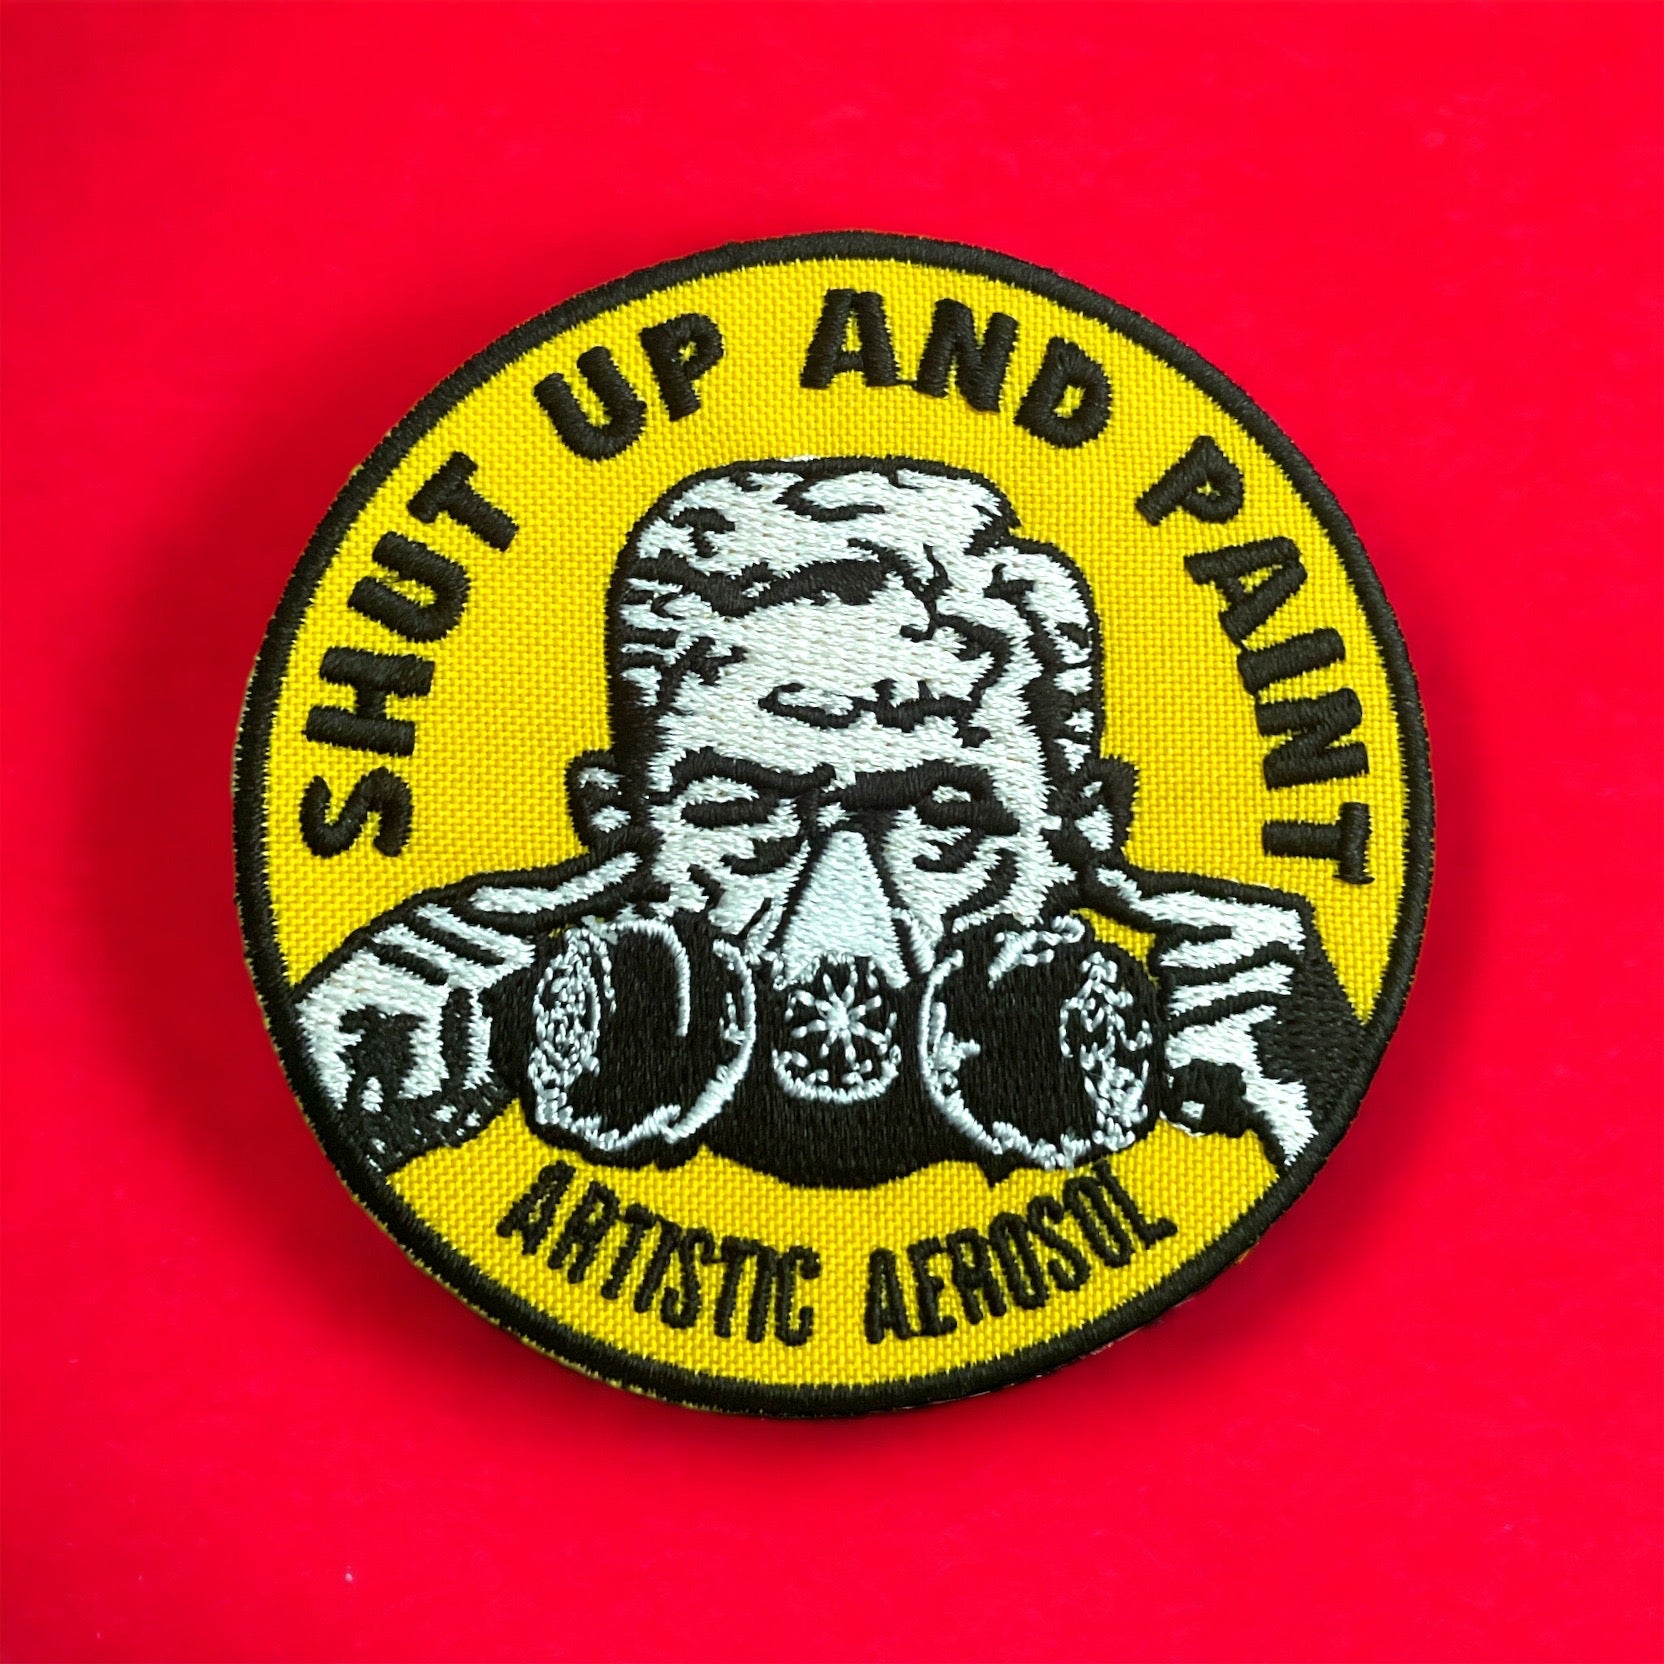 Shut Up and Paint Patch